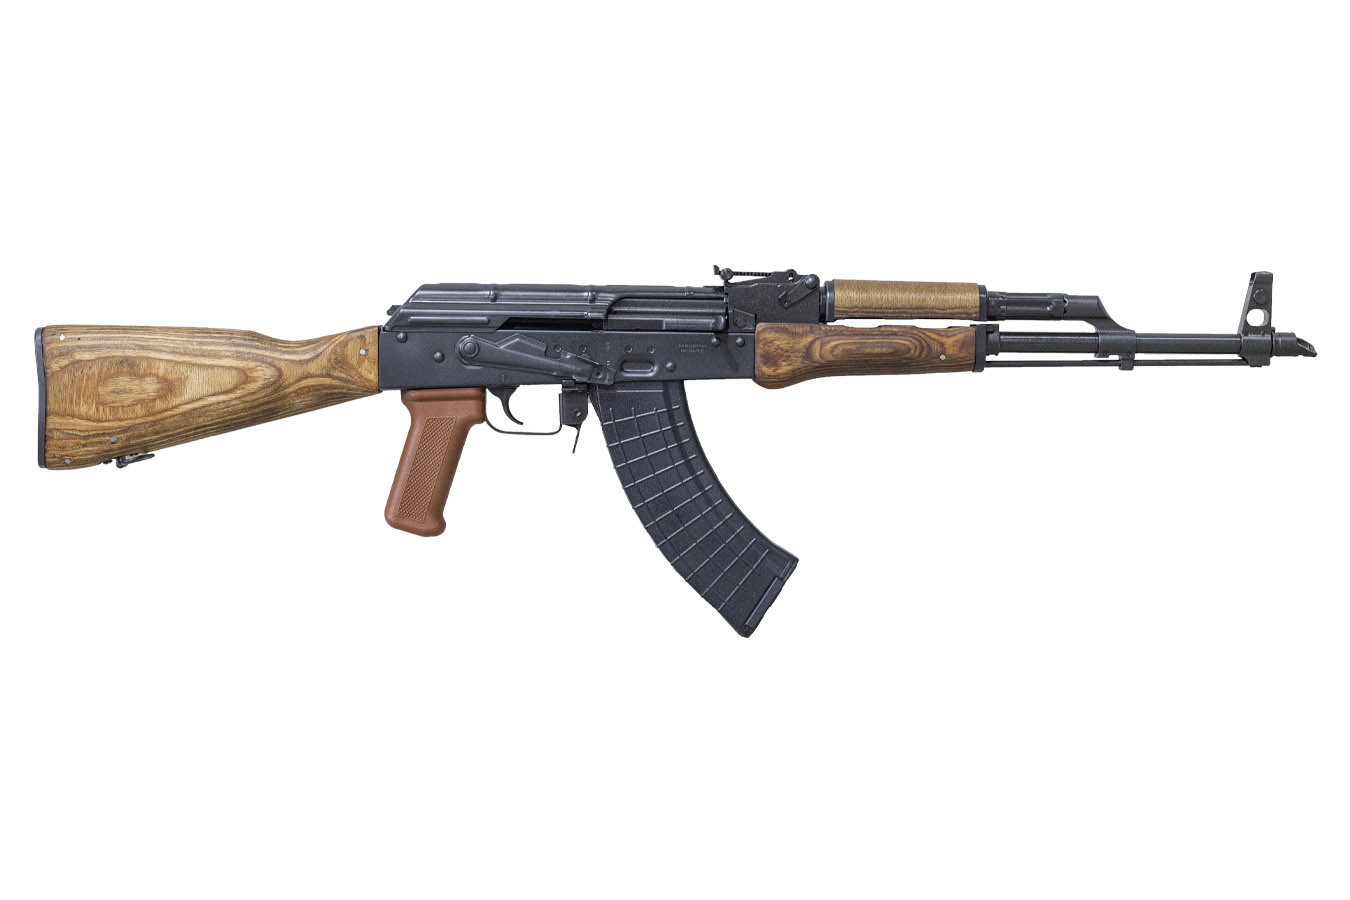 No. 15 Best Selling: PIONEER ARMS AK-47 7.62X39MM RIFLE